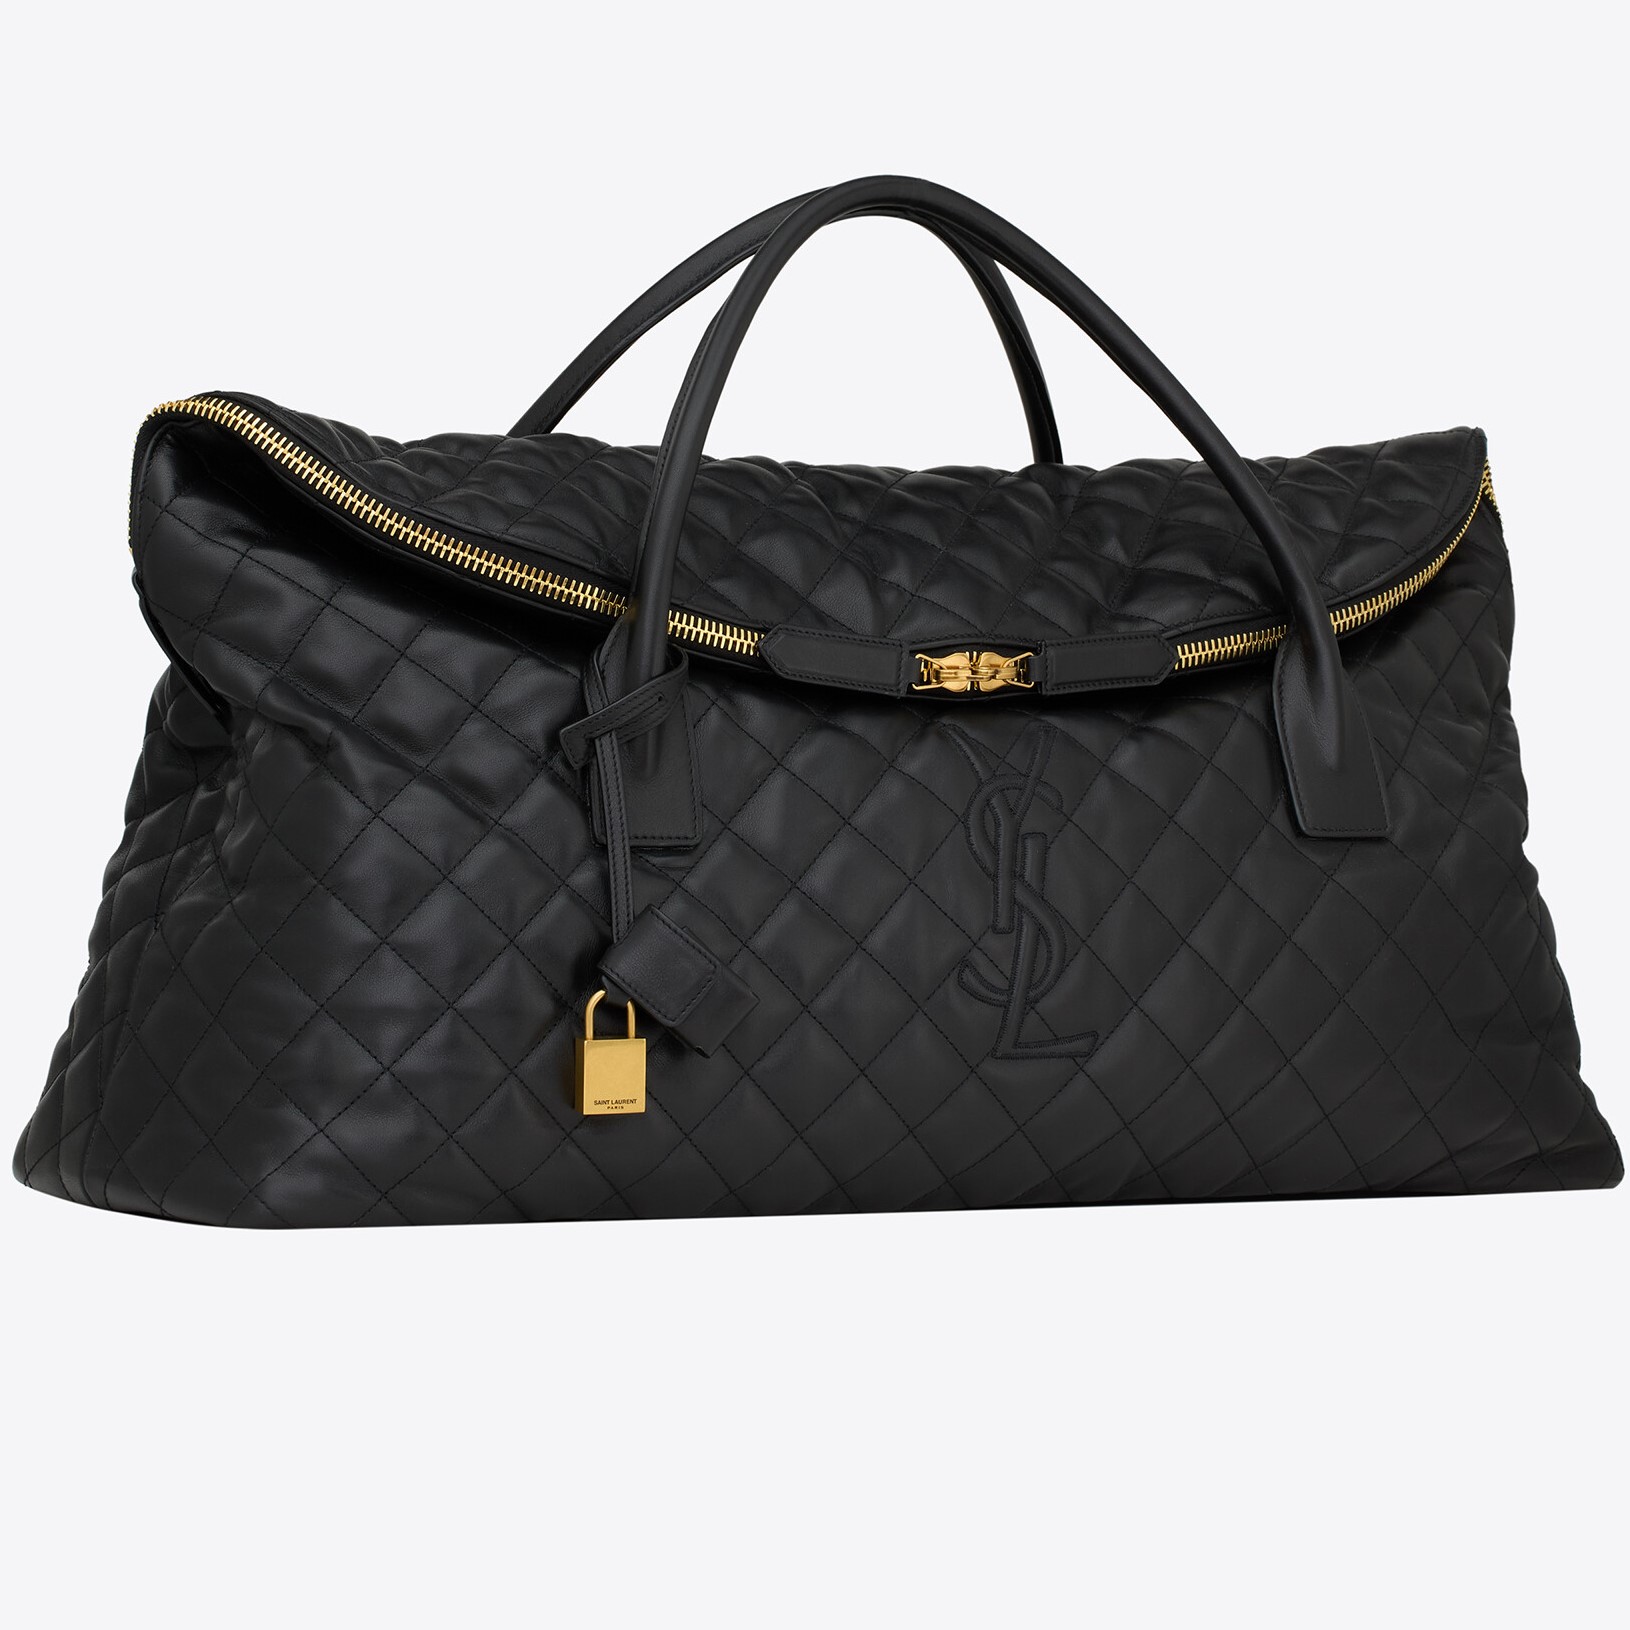 TÚI DU LỊCH YSL ES GIANT TRAVEL BAG IN QUILTED LEATHER 4